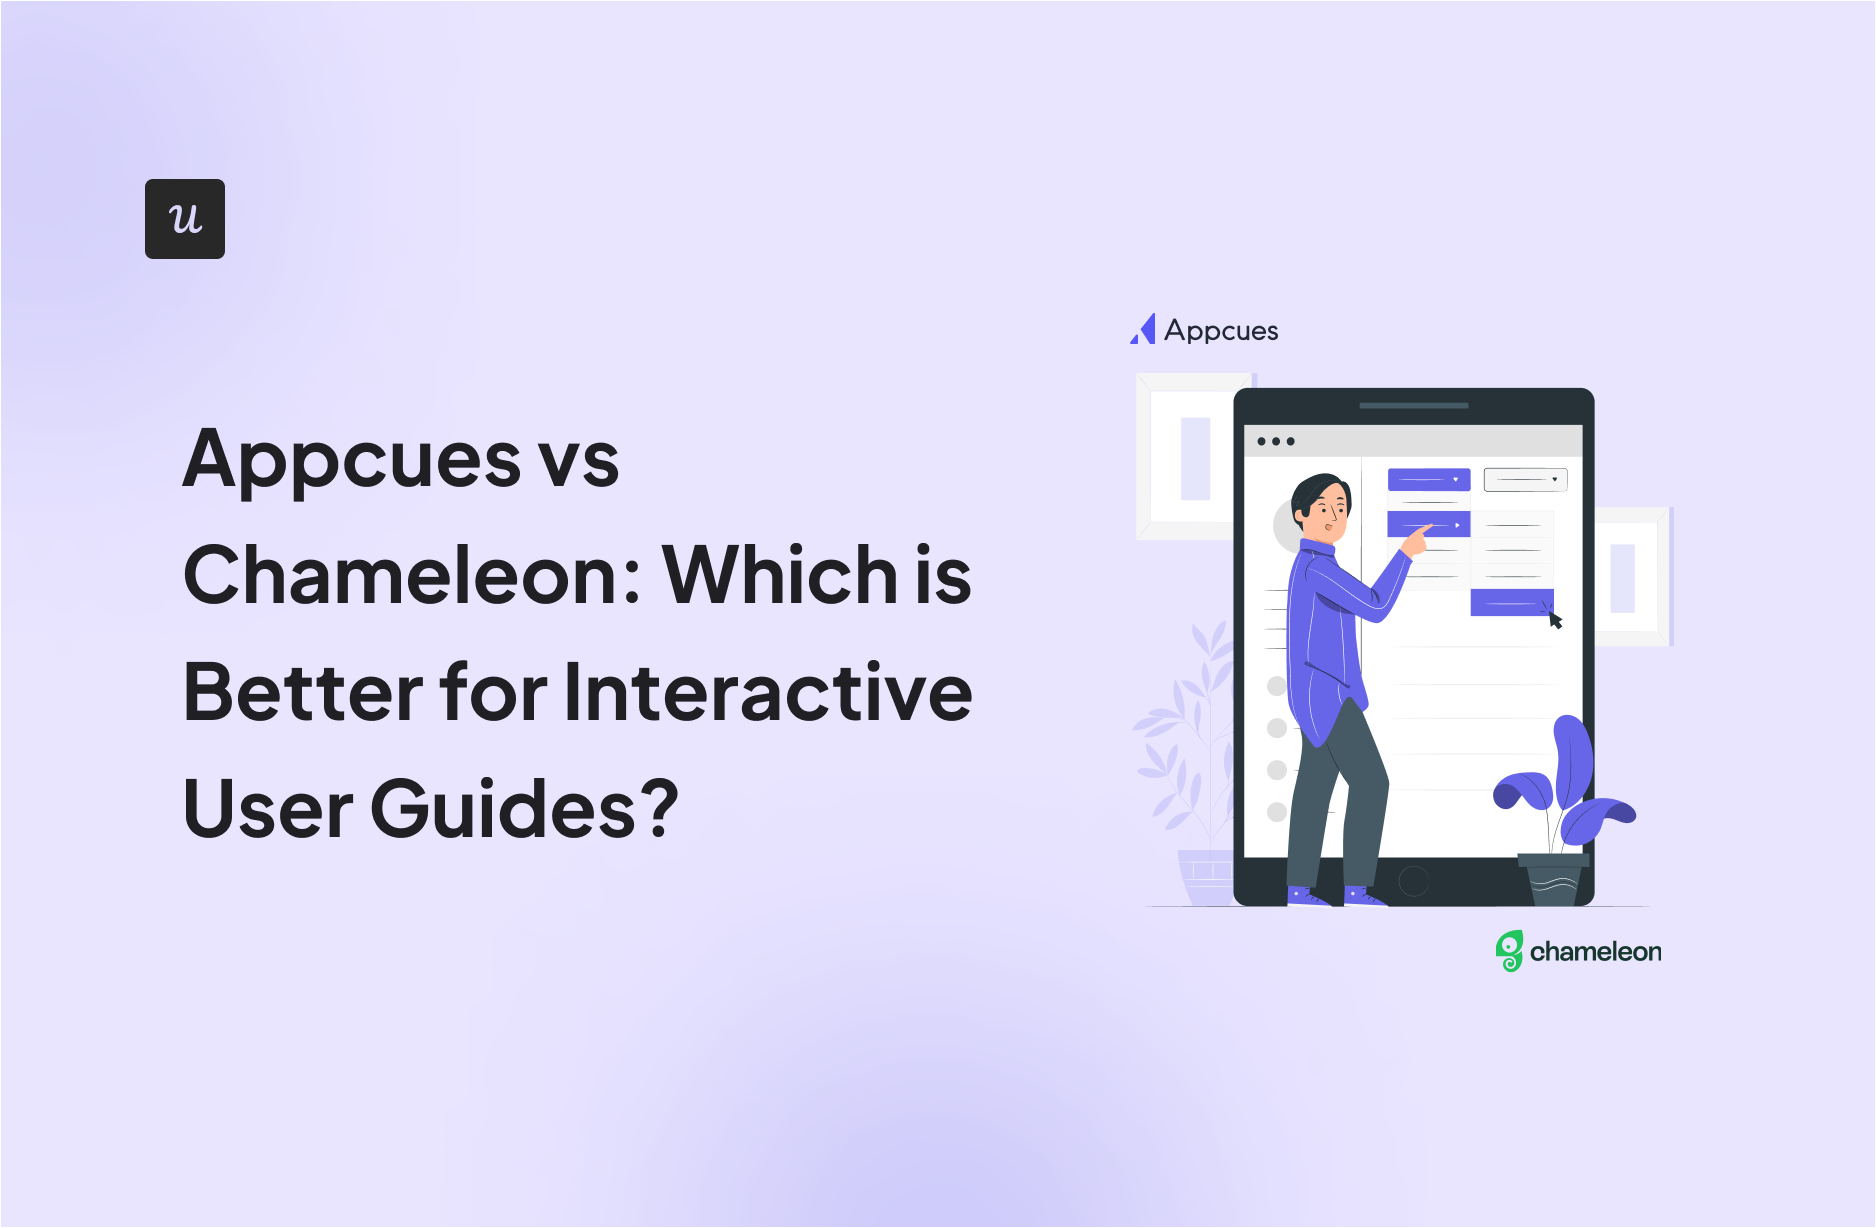 Appcues vs Chameleon: Which is Better for Interactive User Guides?